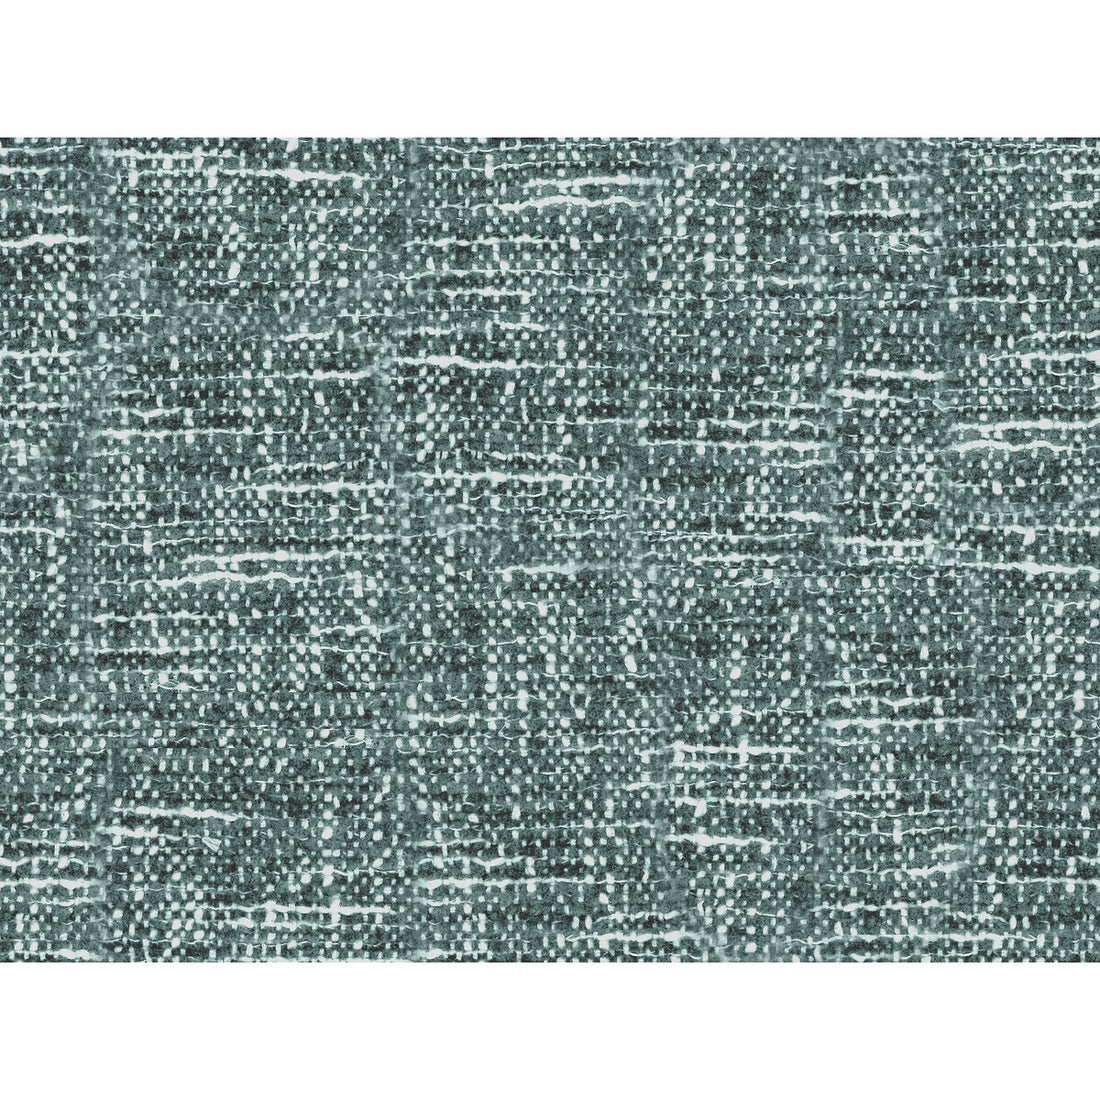 Tinge fabric in lake color - pattern GWF-3720.513.0 - by Lee Jofa Modern in the Kelly Wearstler Textures collection